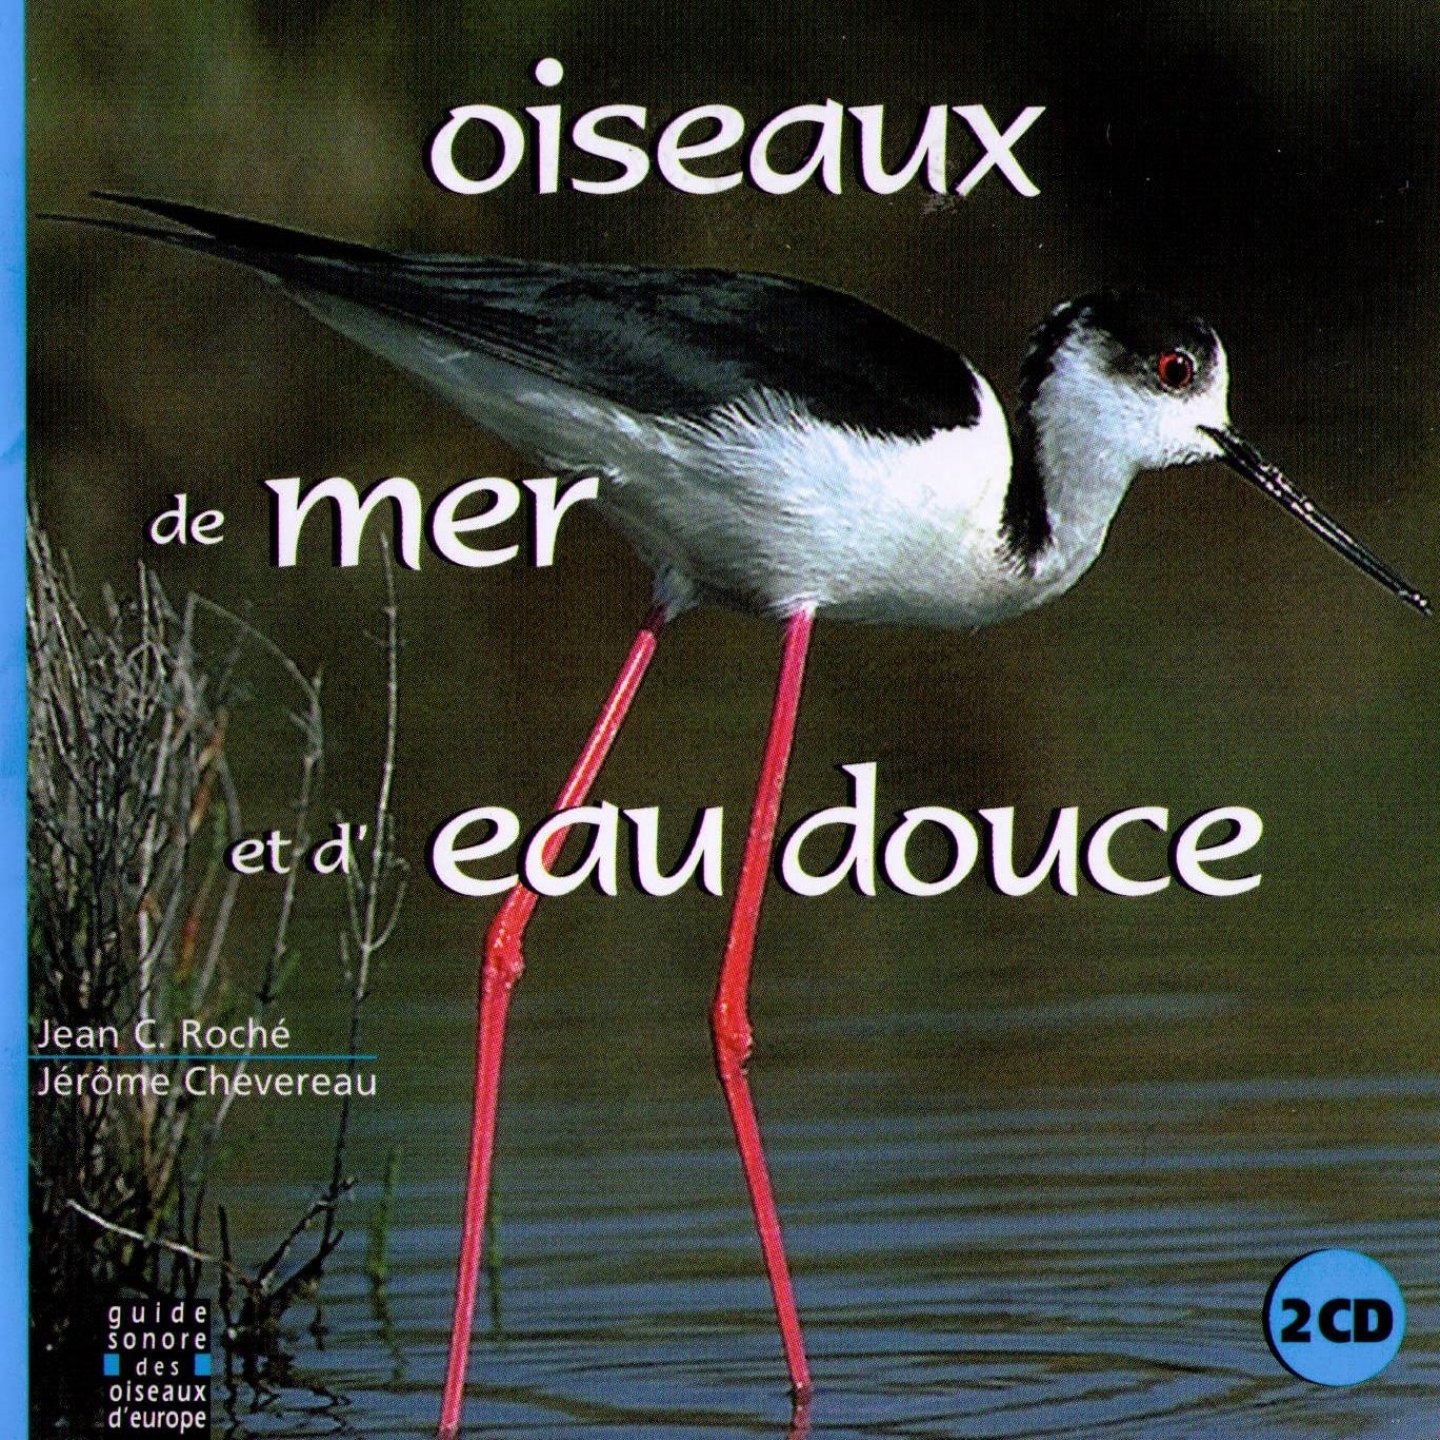 Foulque marcoule (Coot)